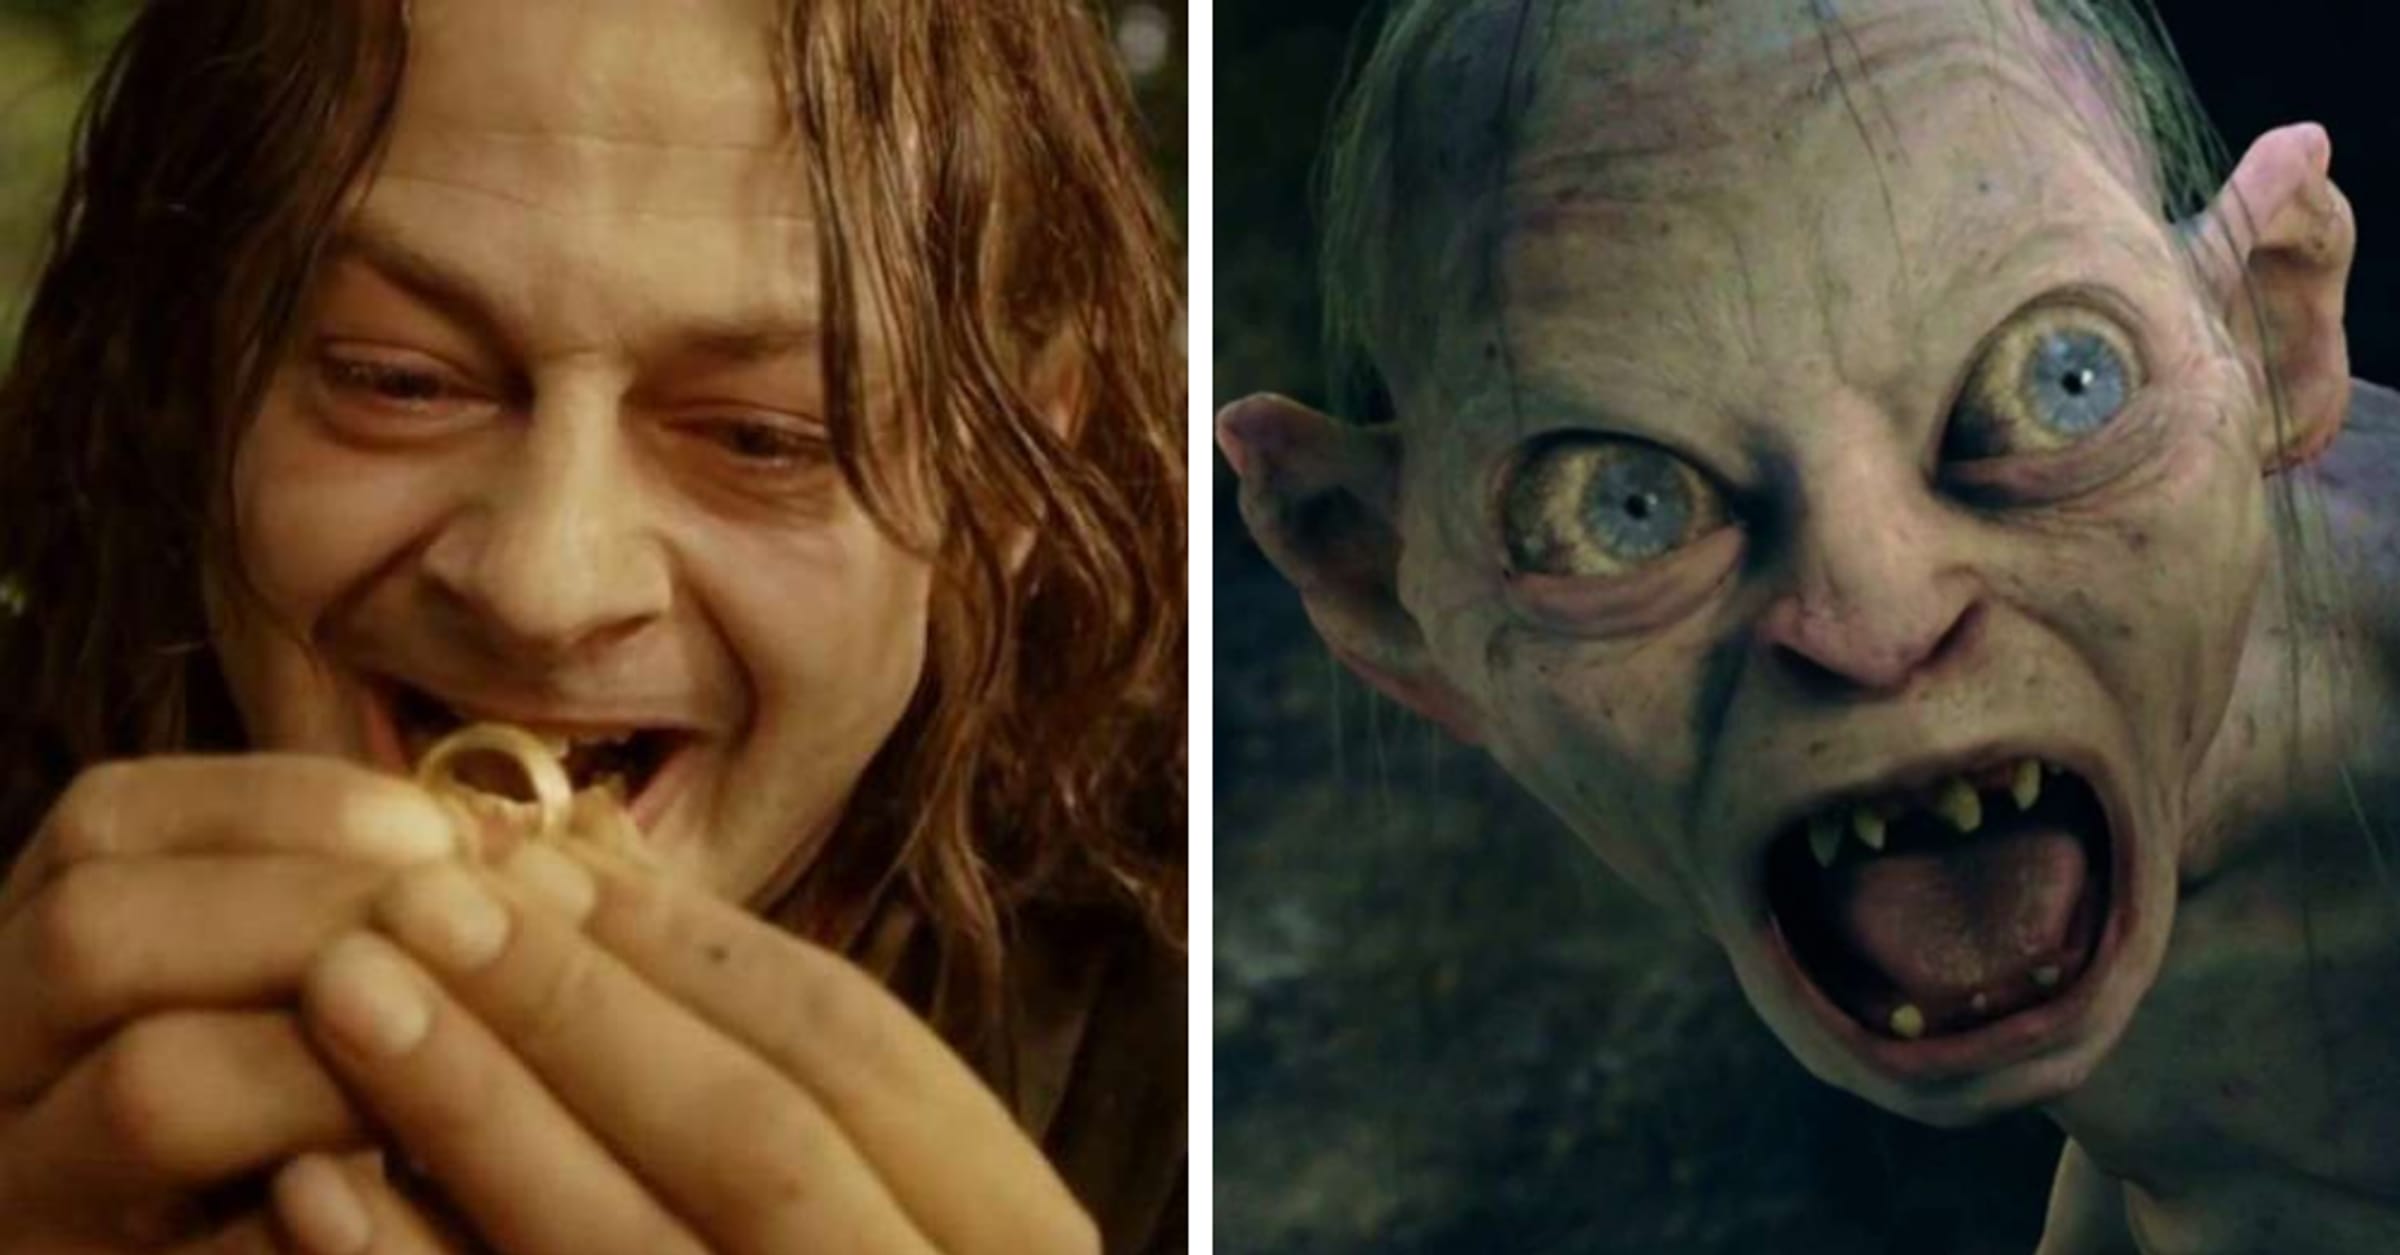 The Lord Of The Rings: Gollum Could Come To Switch, My Precious